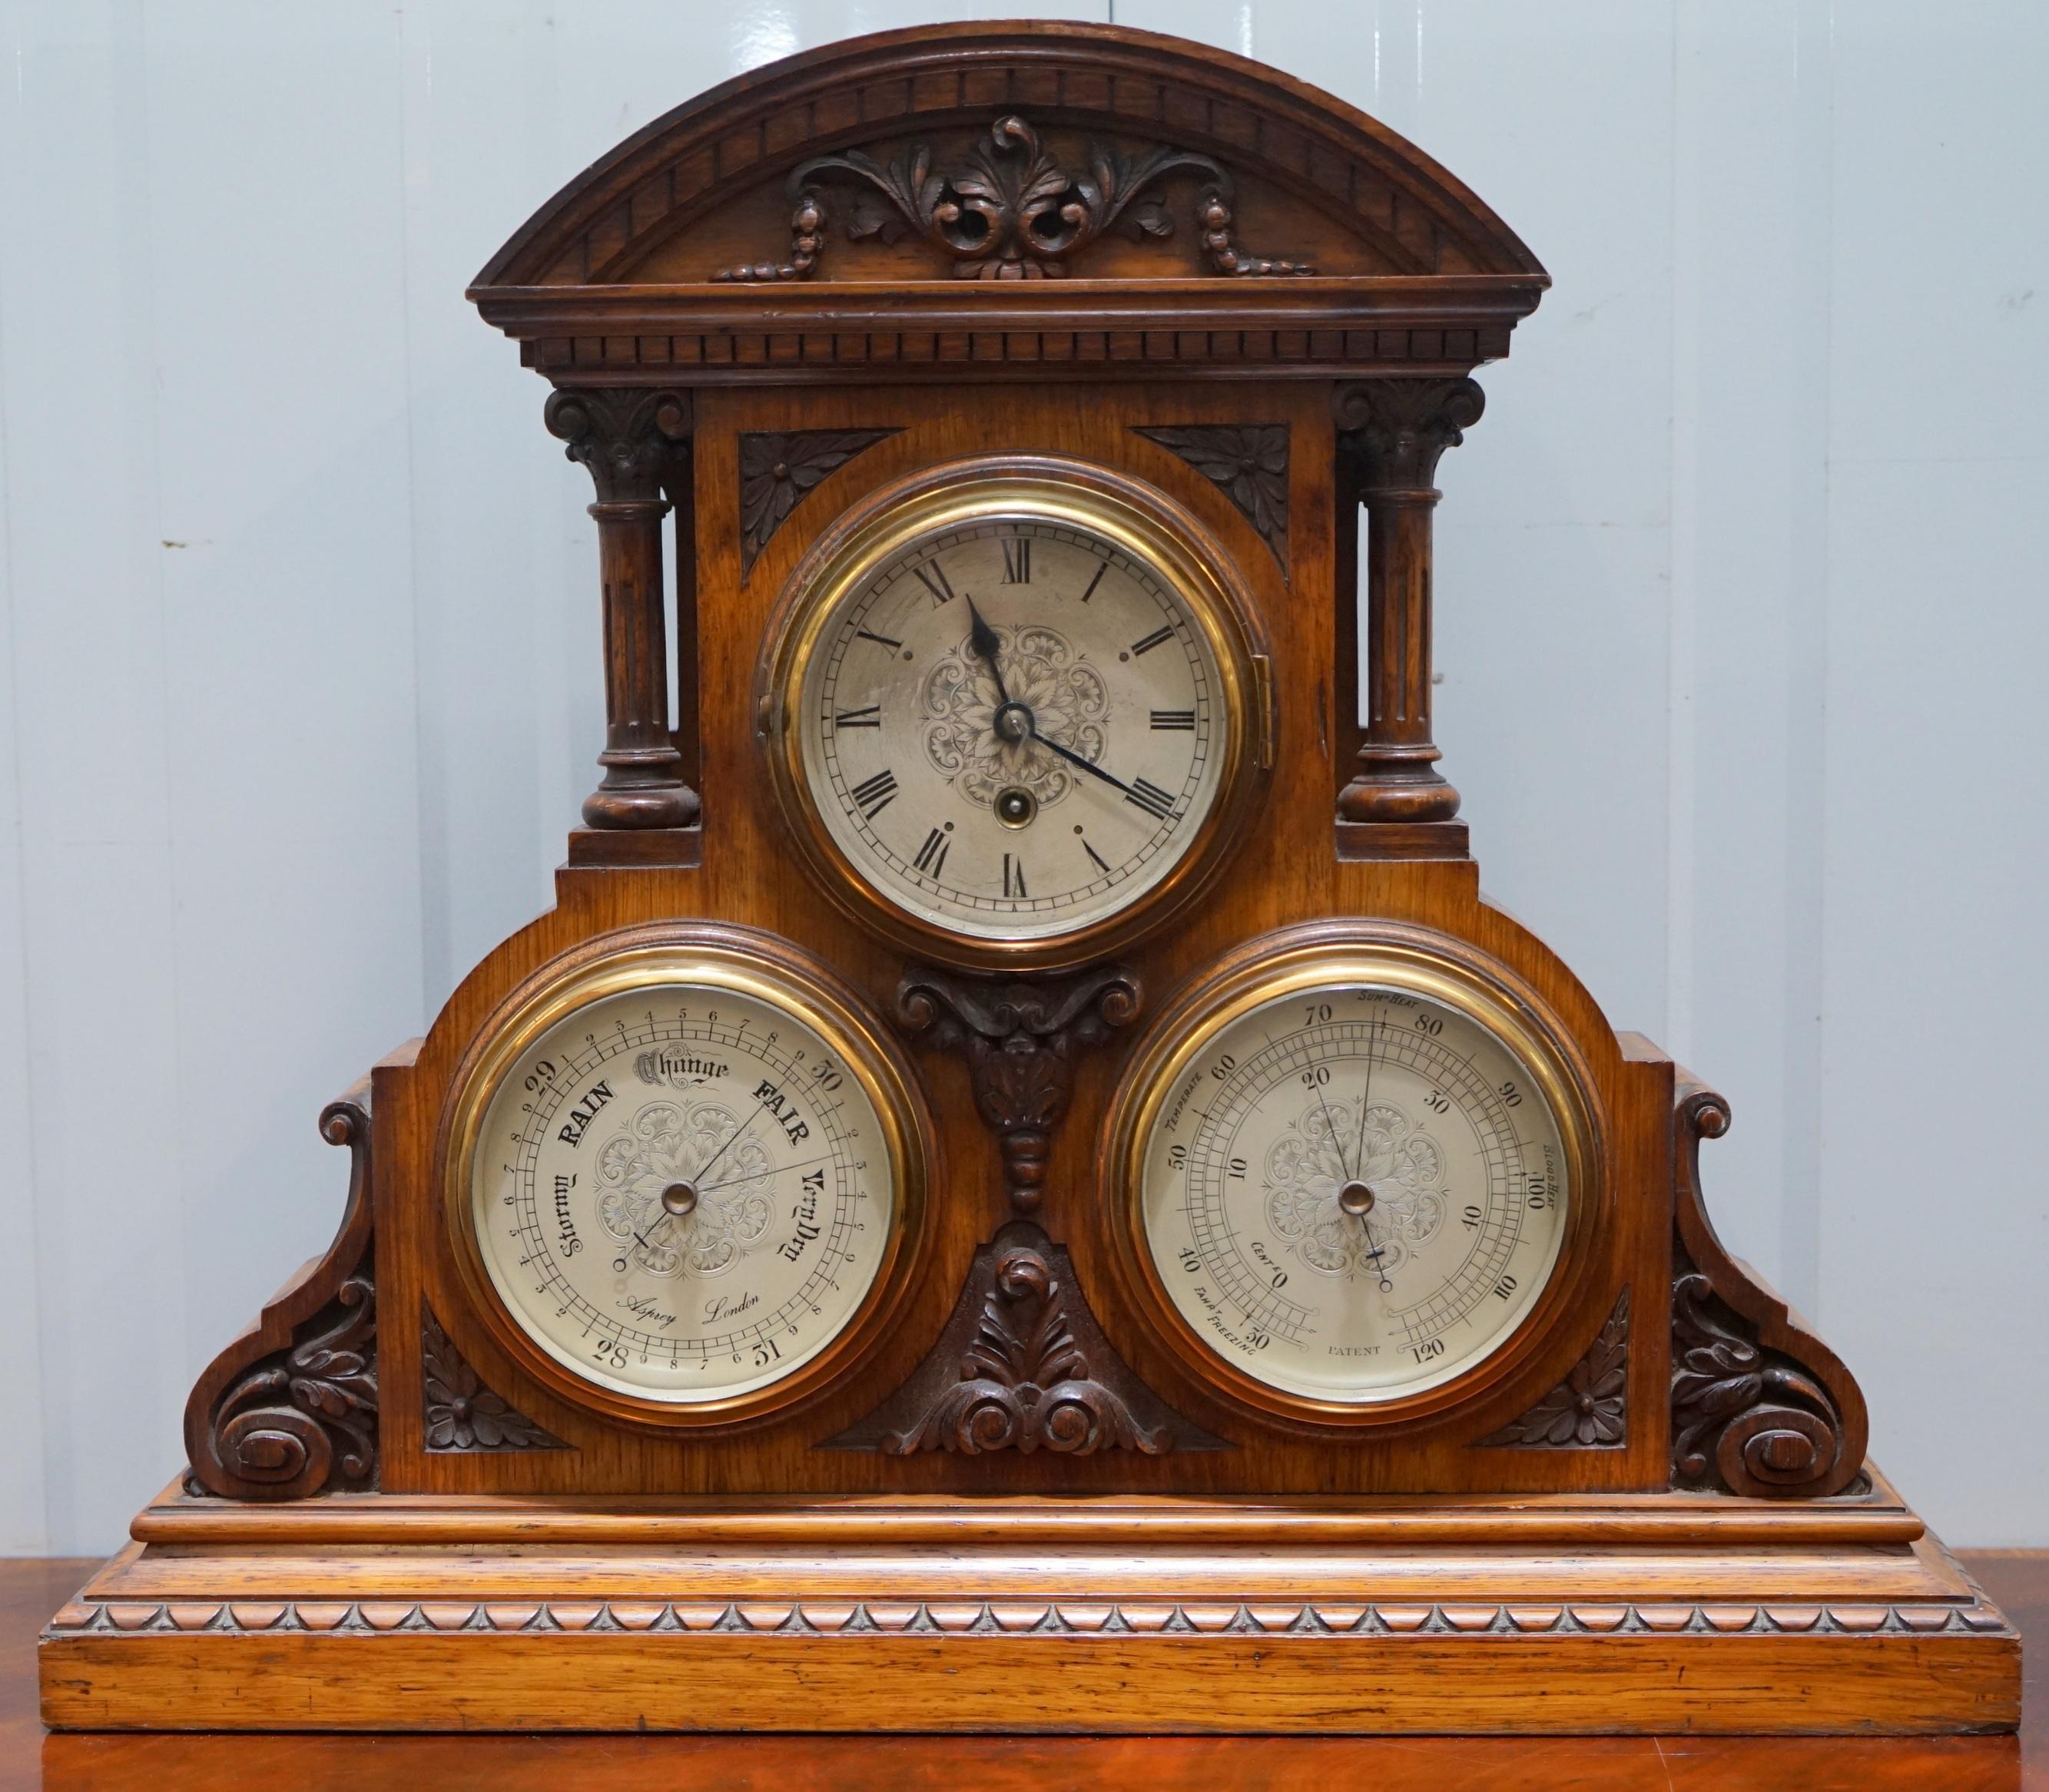 We are delighted to offer for sale this very grand stunning Victorian circa 1880 hand-carved mahogany with Corinthian pillars combination clock, barometer and thermometer designed by and retailed through Asprey London.

A very rare piece in